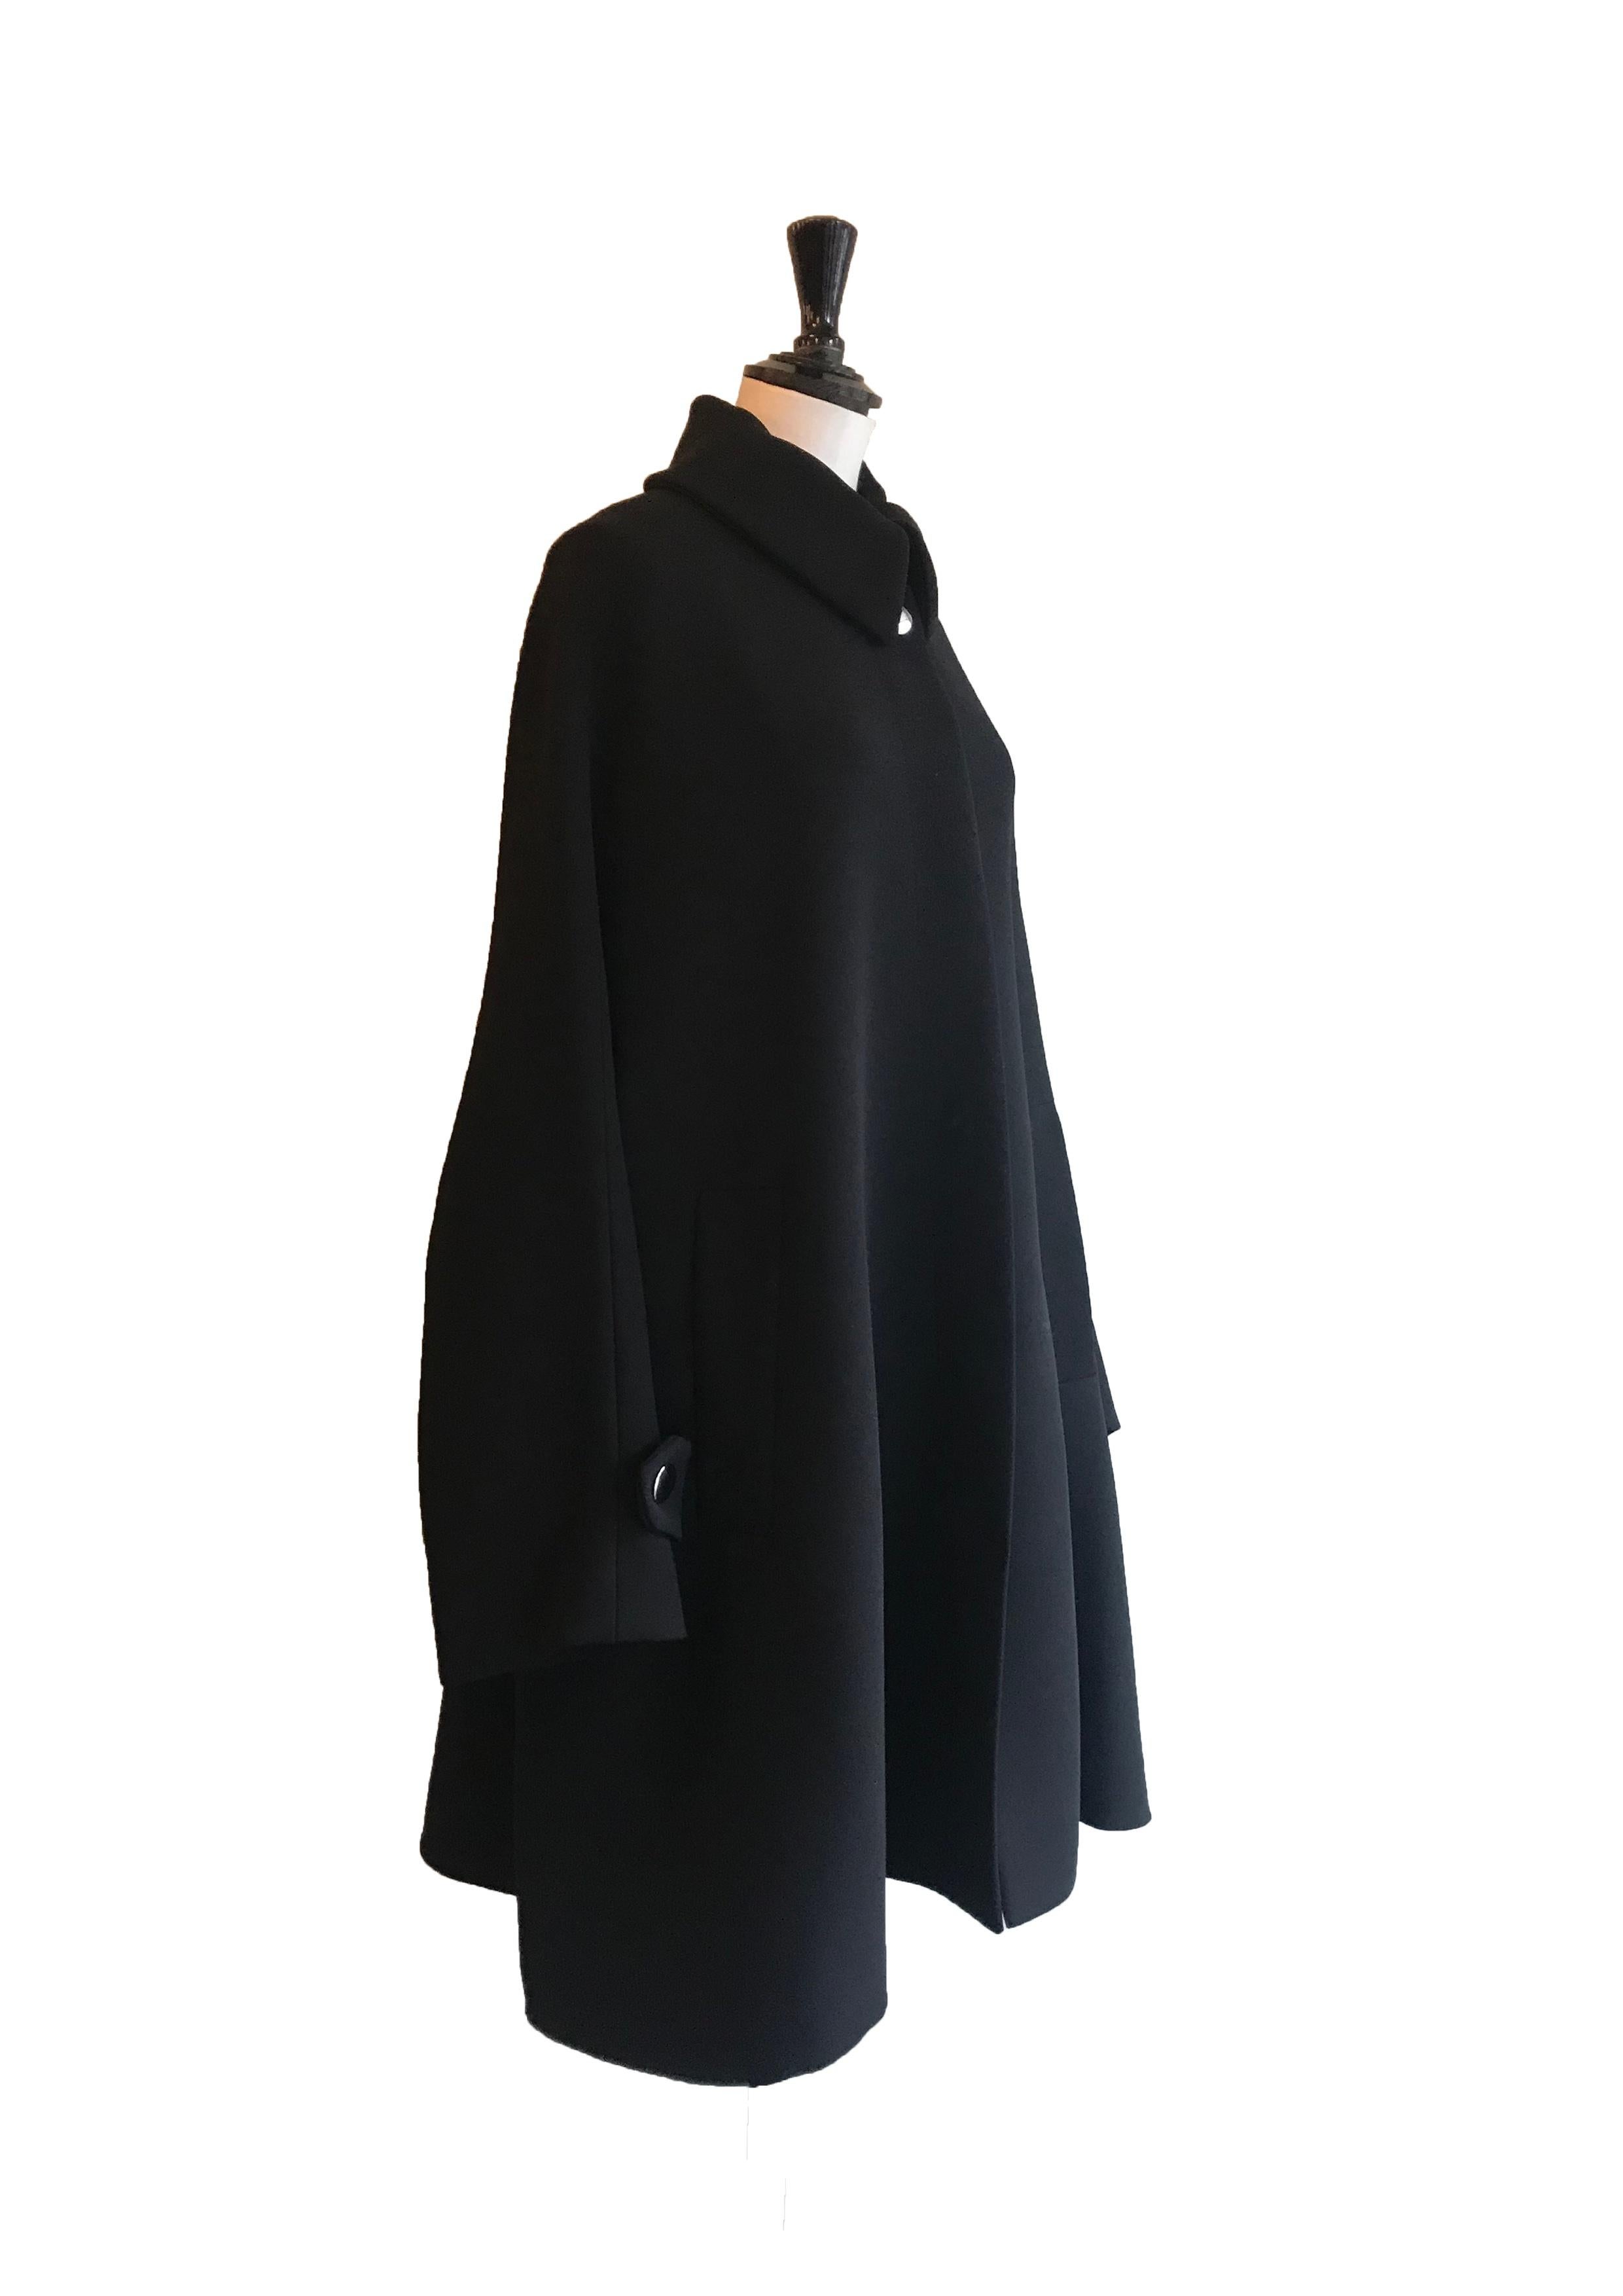 Black Opera style coat from Balenciaga. Triangular, oversized, cape like shape. Invisible popper fastening with statement silver stud button at the collar. Diagonal slip pockets either side of hip. Wide, dropped style sleeves with flap detail